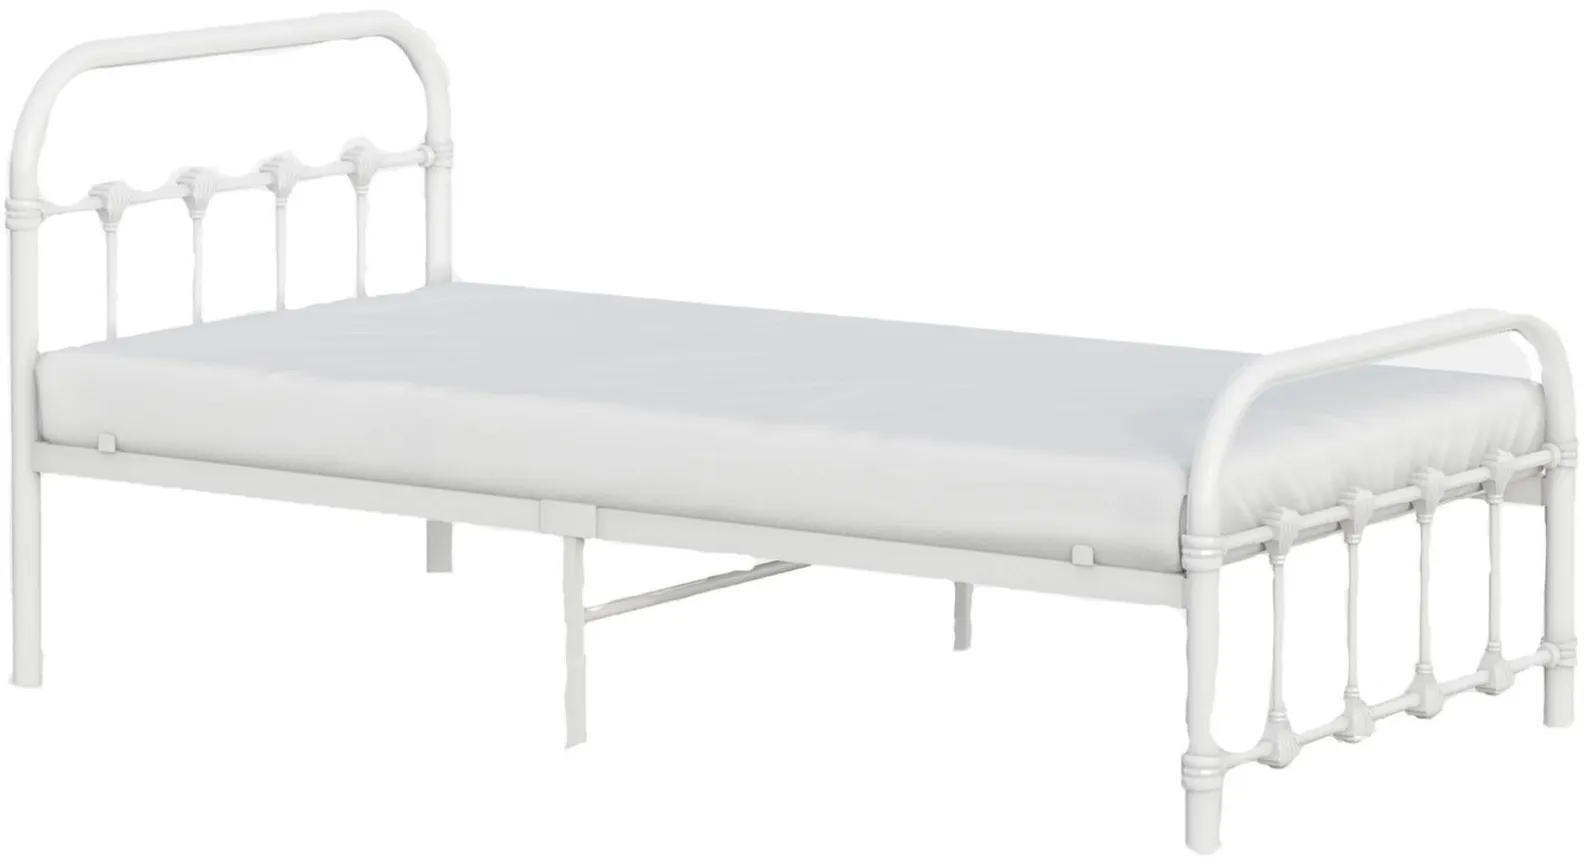 Melissa Metal Twin Bed in White by BK Furniture